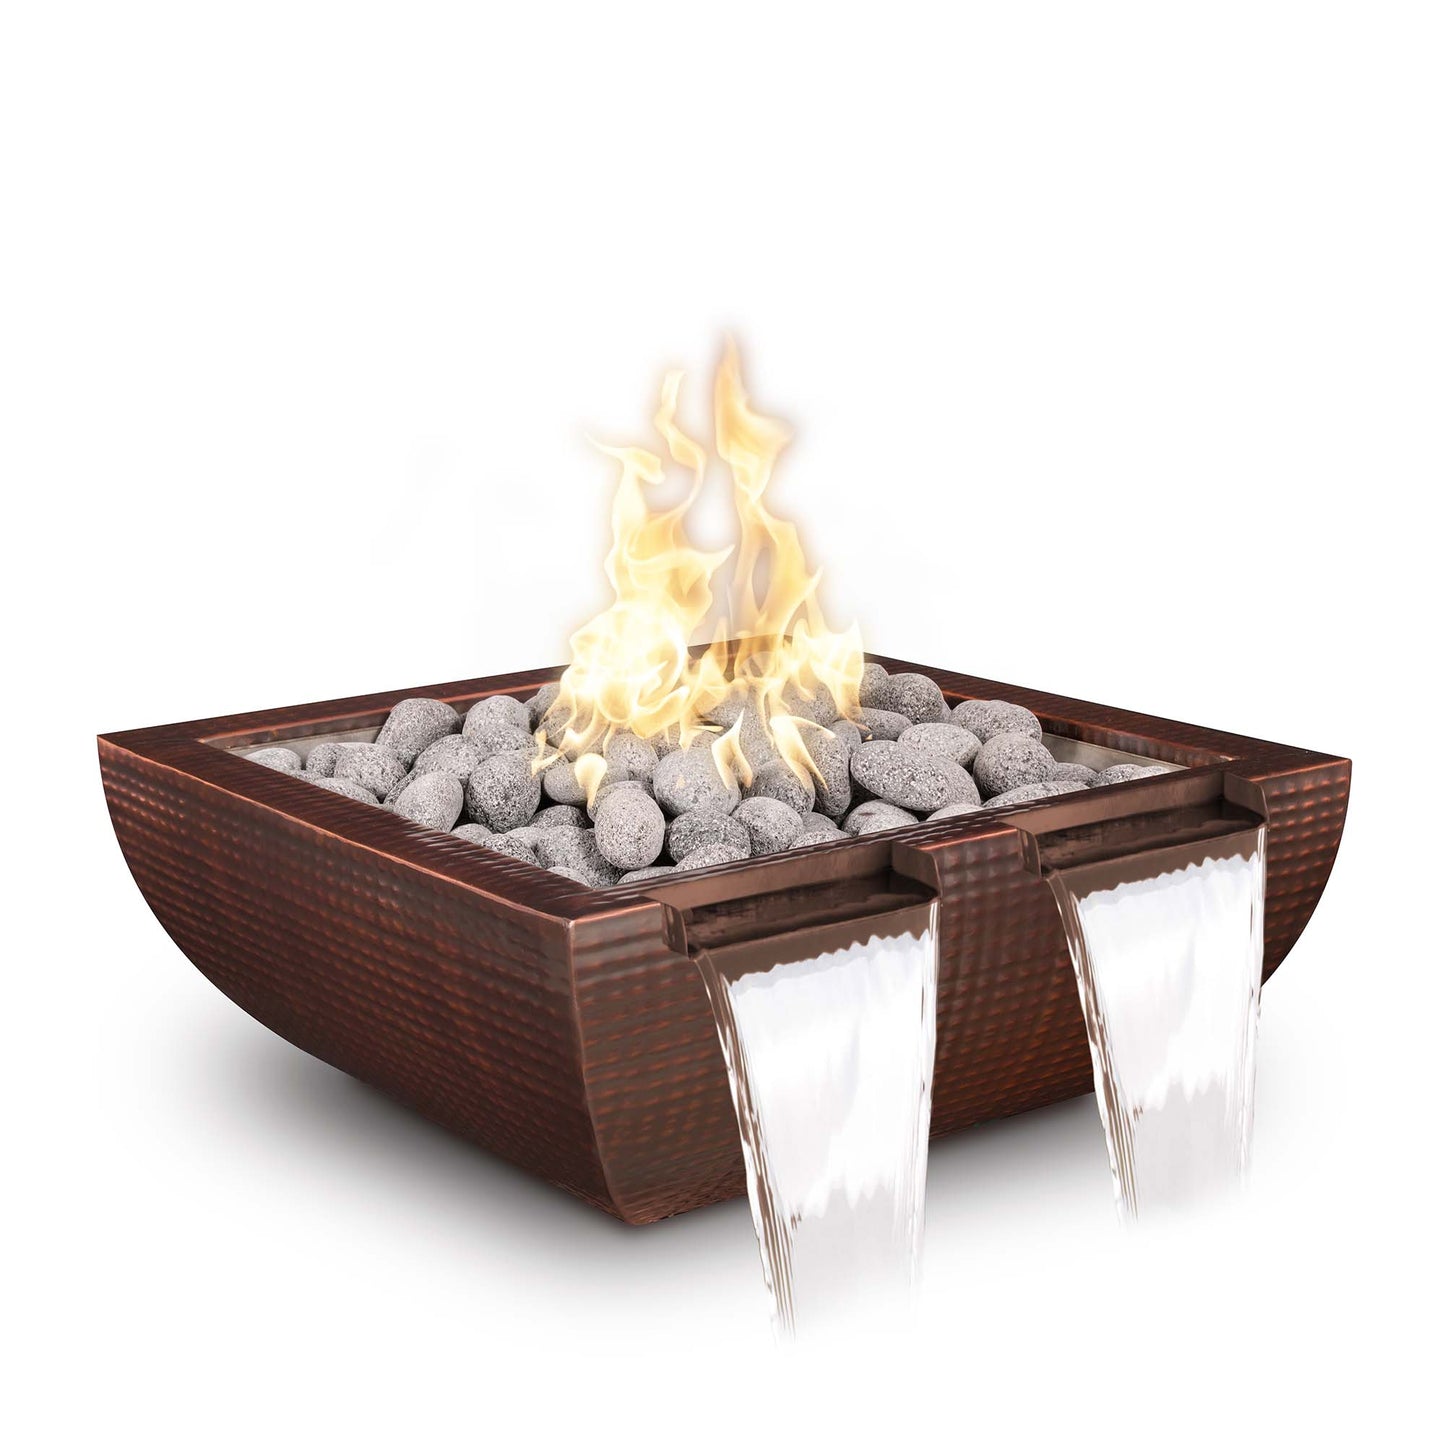 The Outdoor Plus Avalon Twin Spill 24" Java Powder Coated Metal Natural Gas Fire & Water Bowl with Match Lit with Flame Sense Ignition